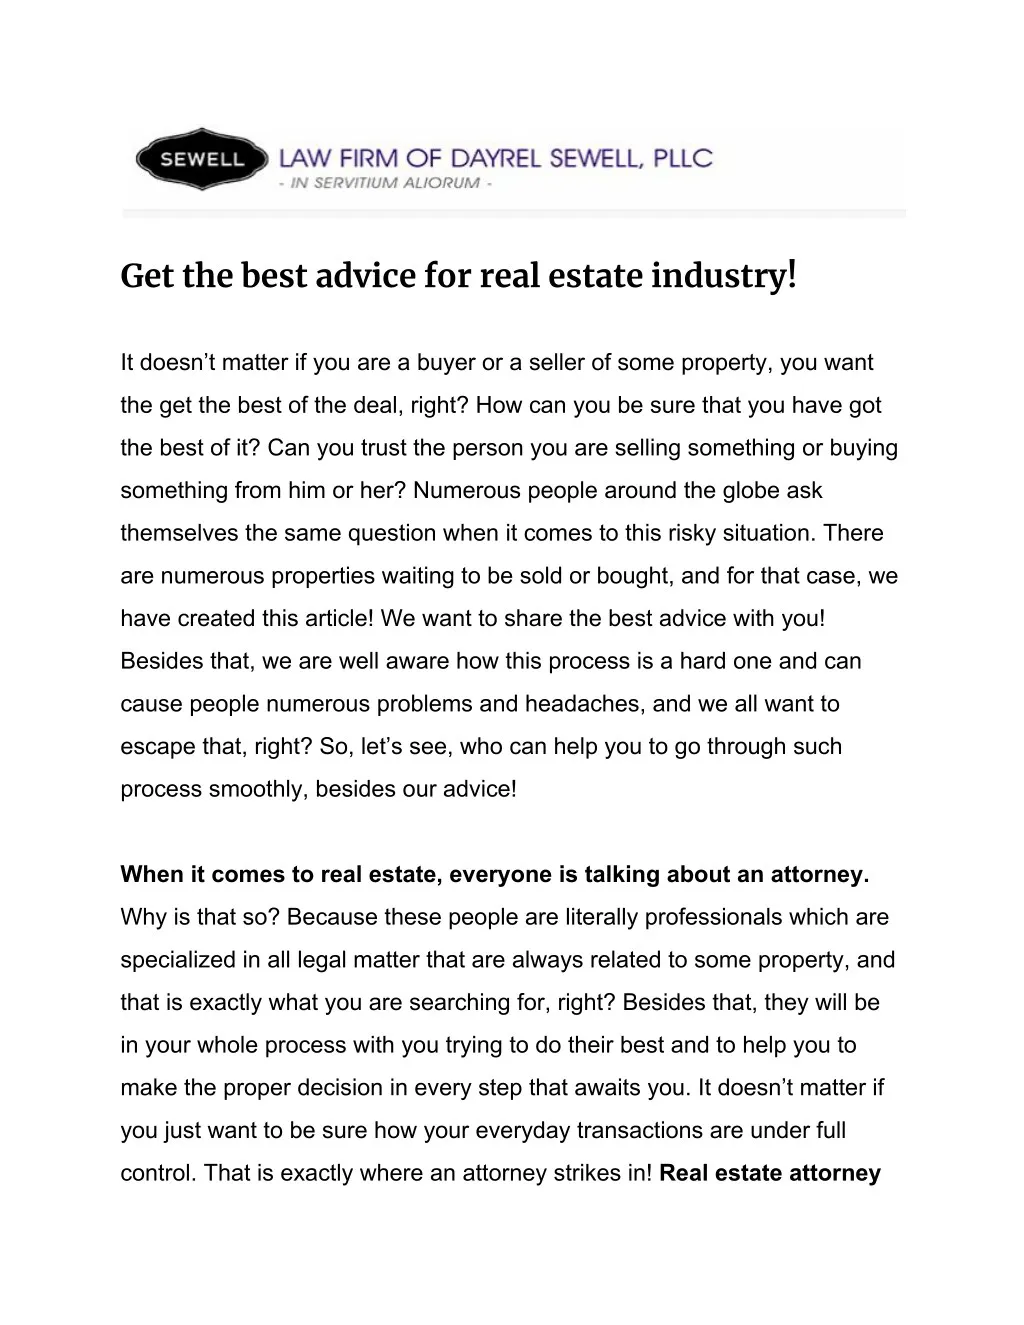 get the best advice for real estate industry